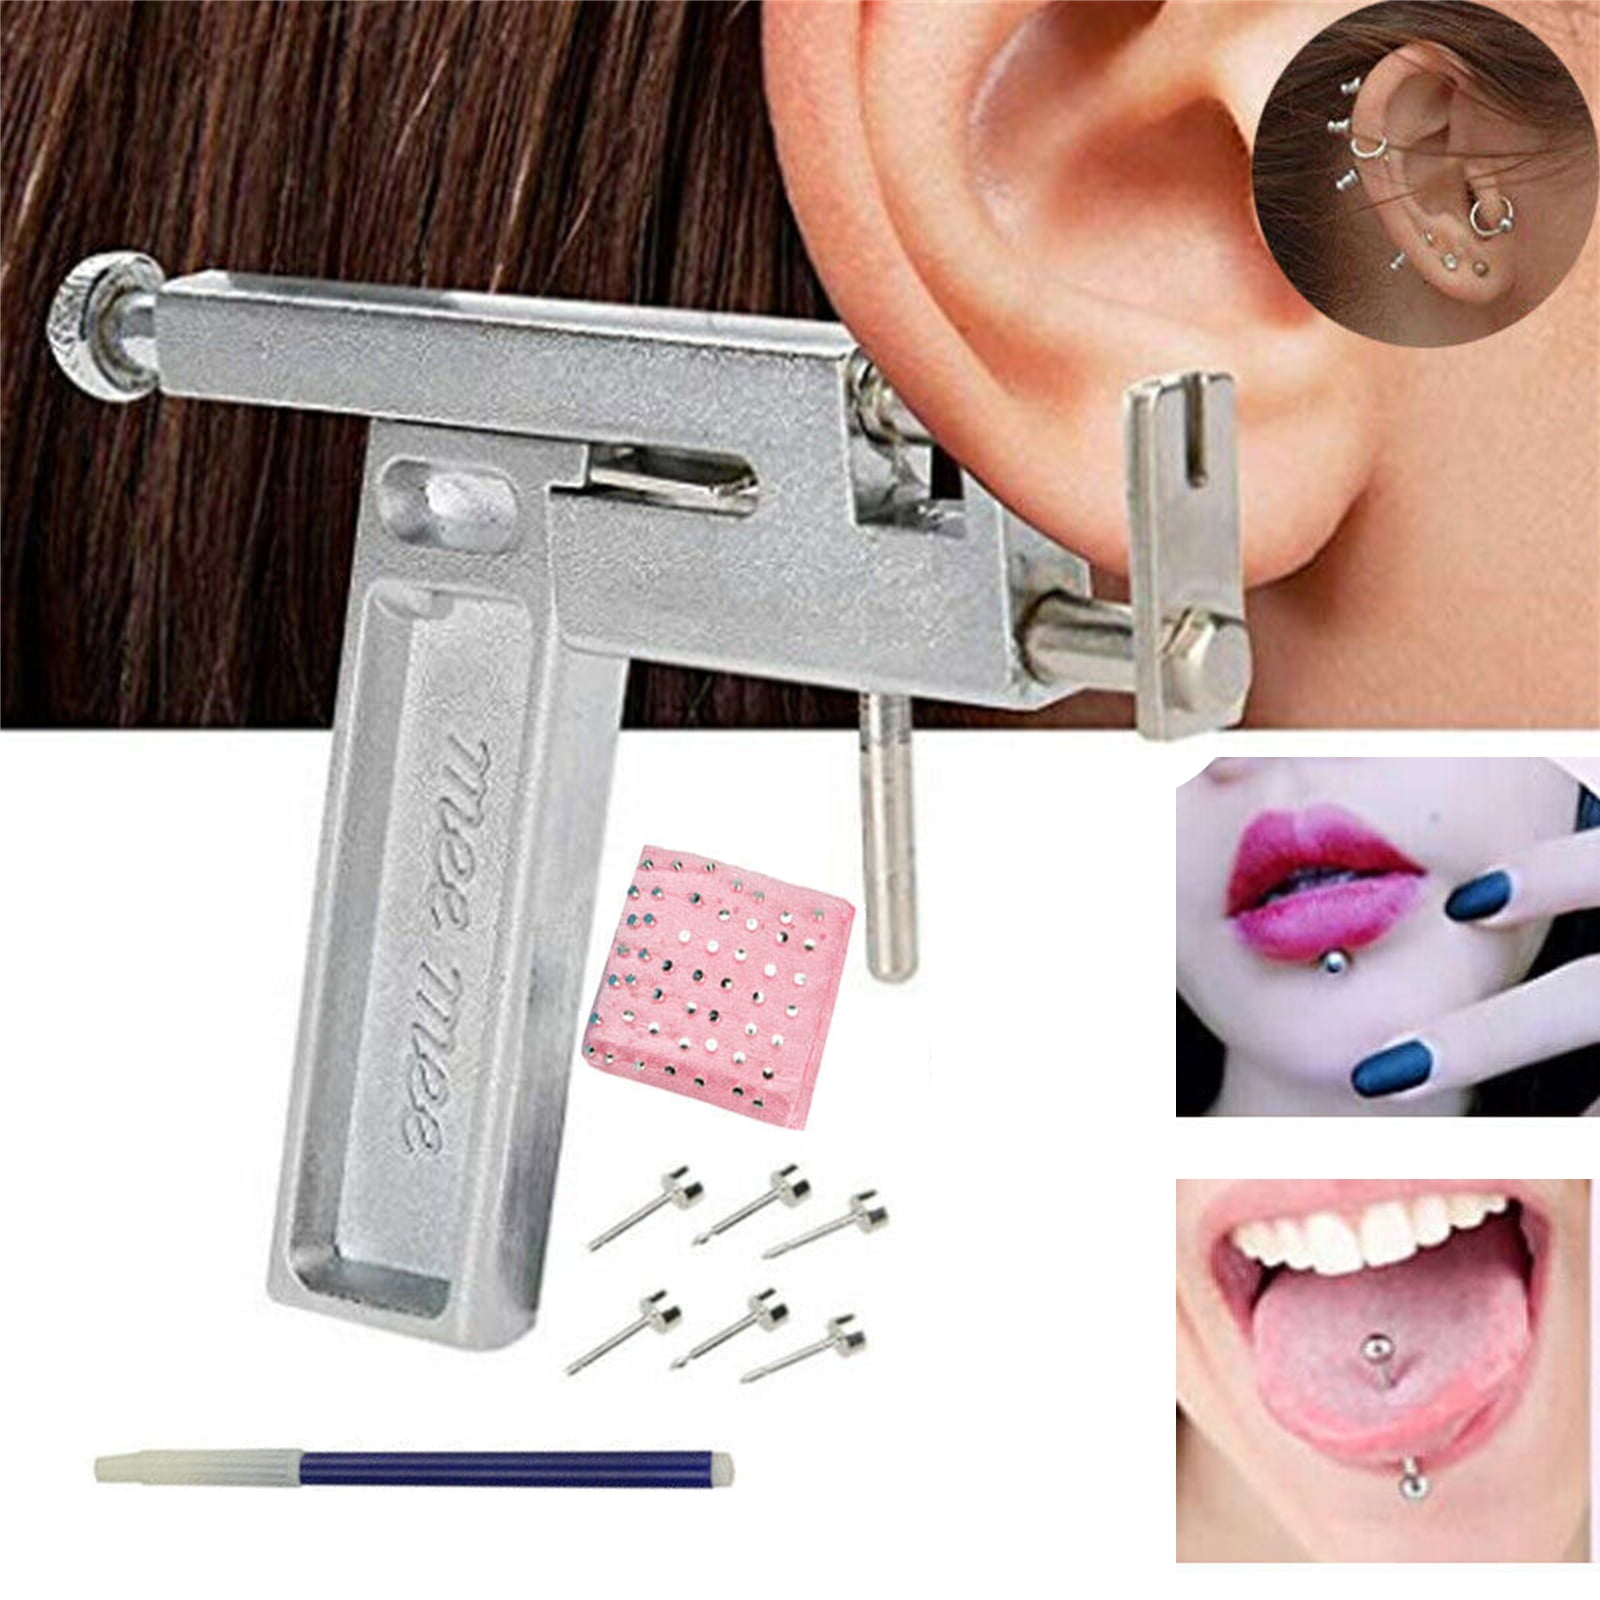 Walmeck 1 Set Professional Steel Stainless Ear Piercing Kit with